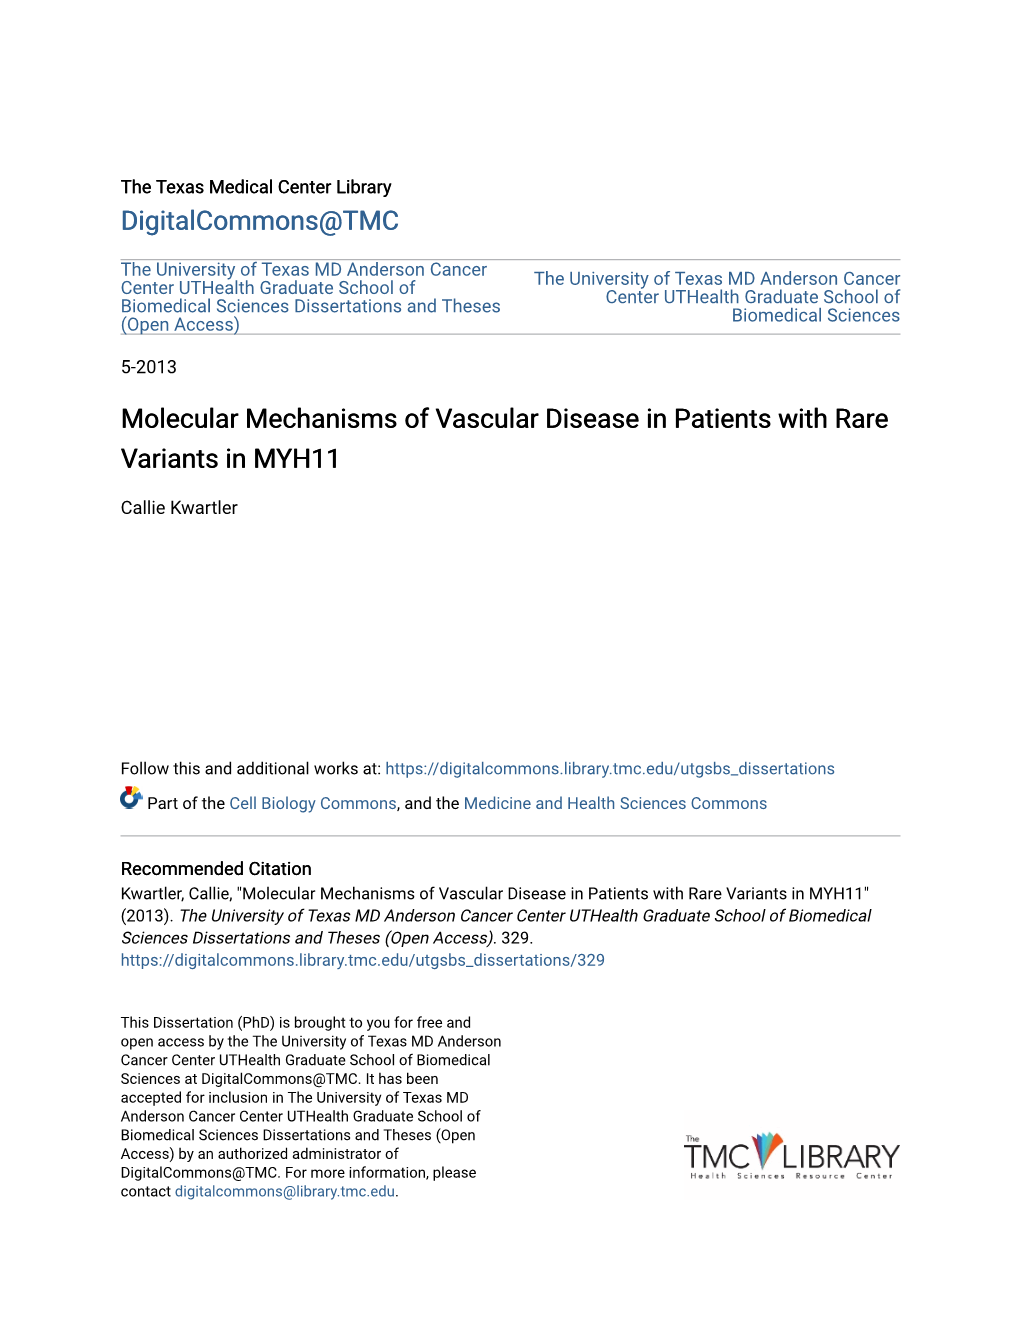 Molecular Mechanisms of Vascular Disease in Patients with Rare Variants in MYH11